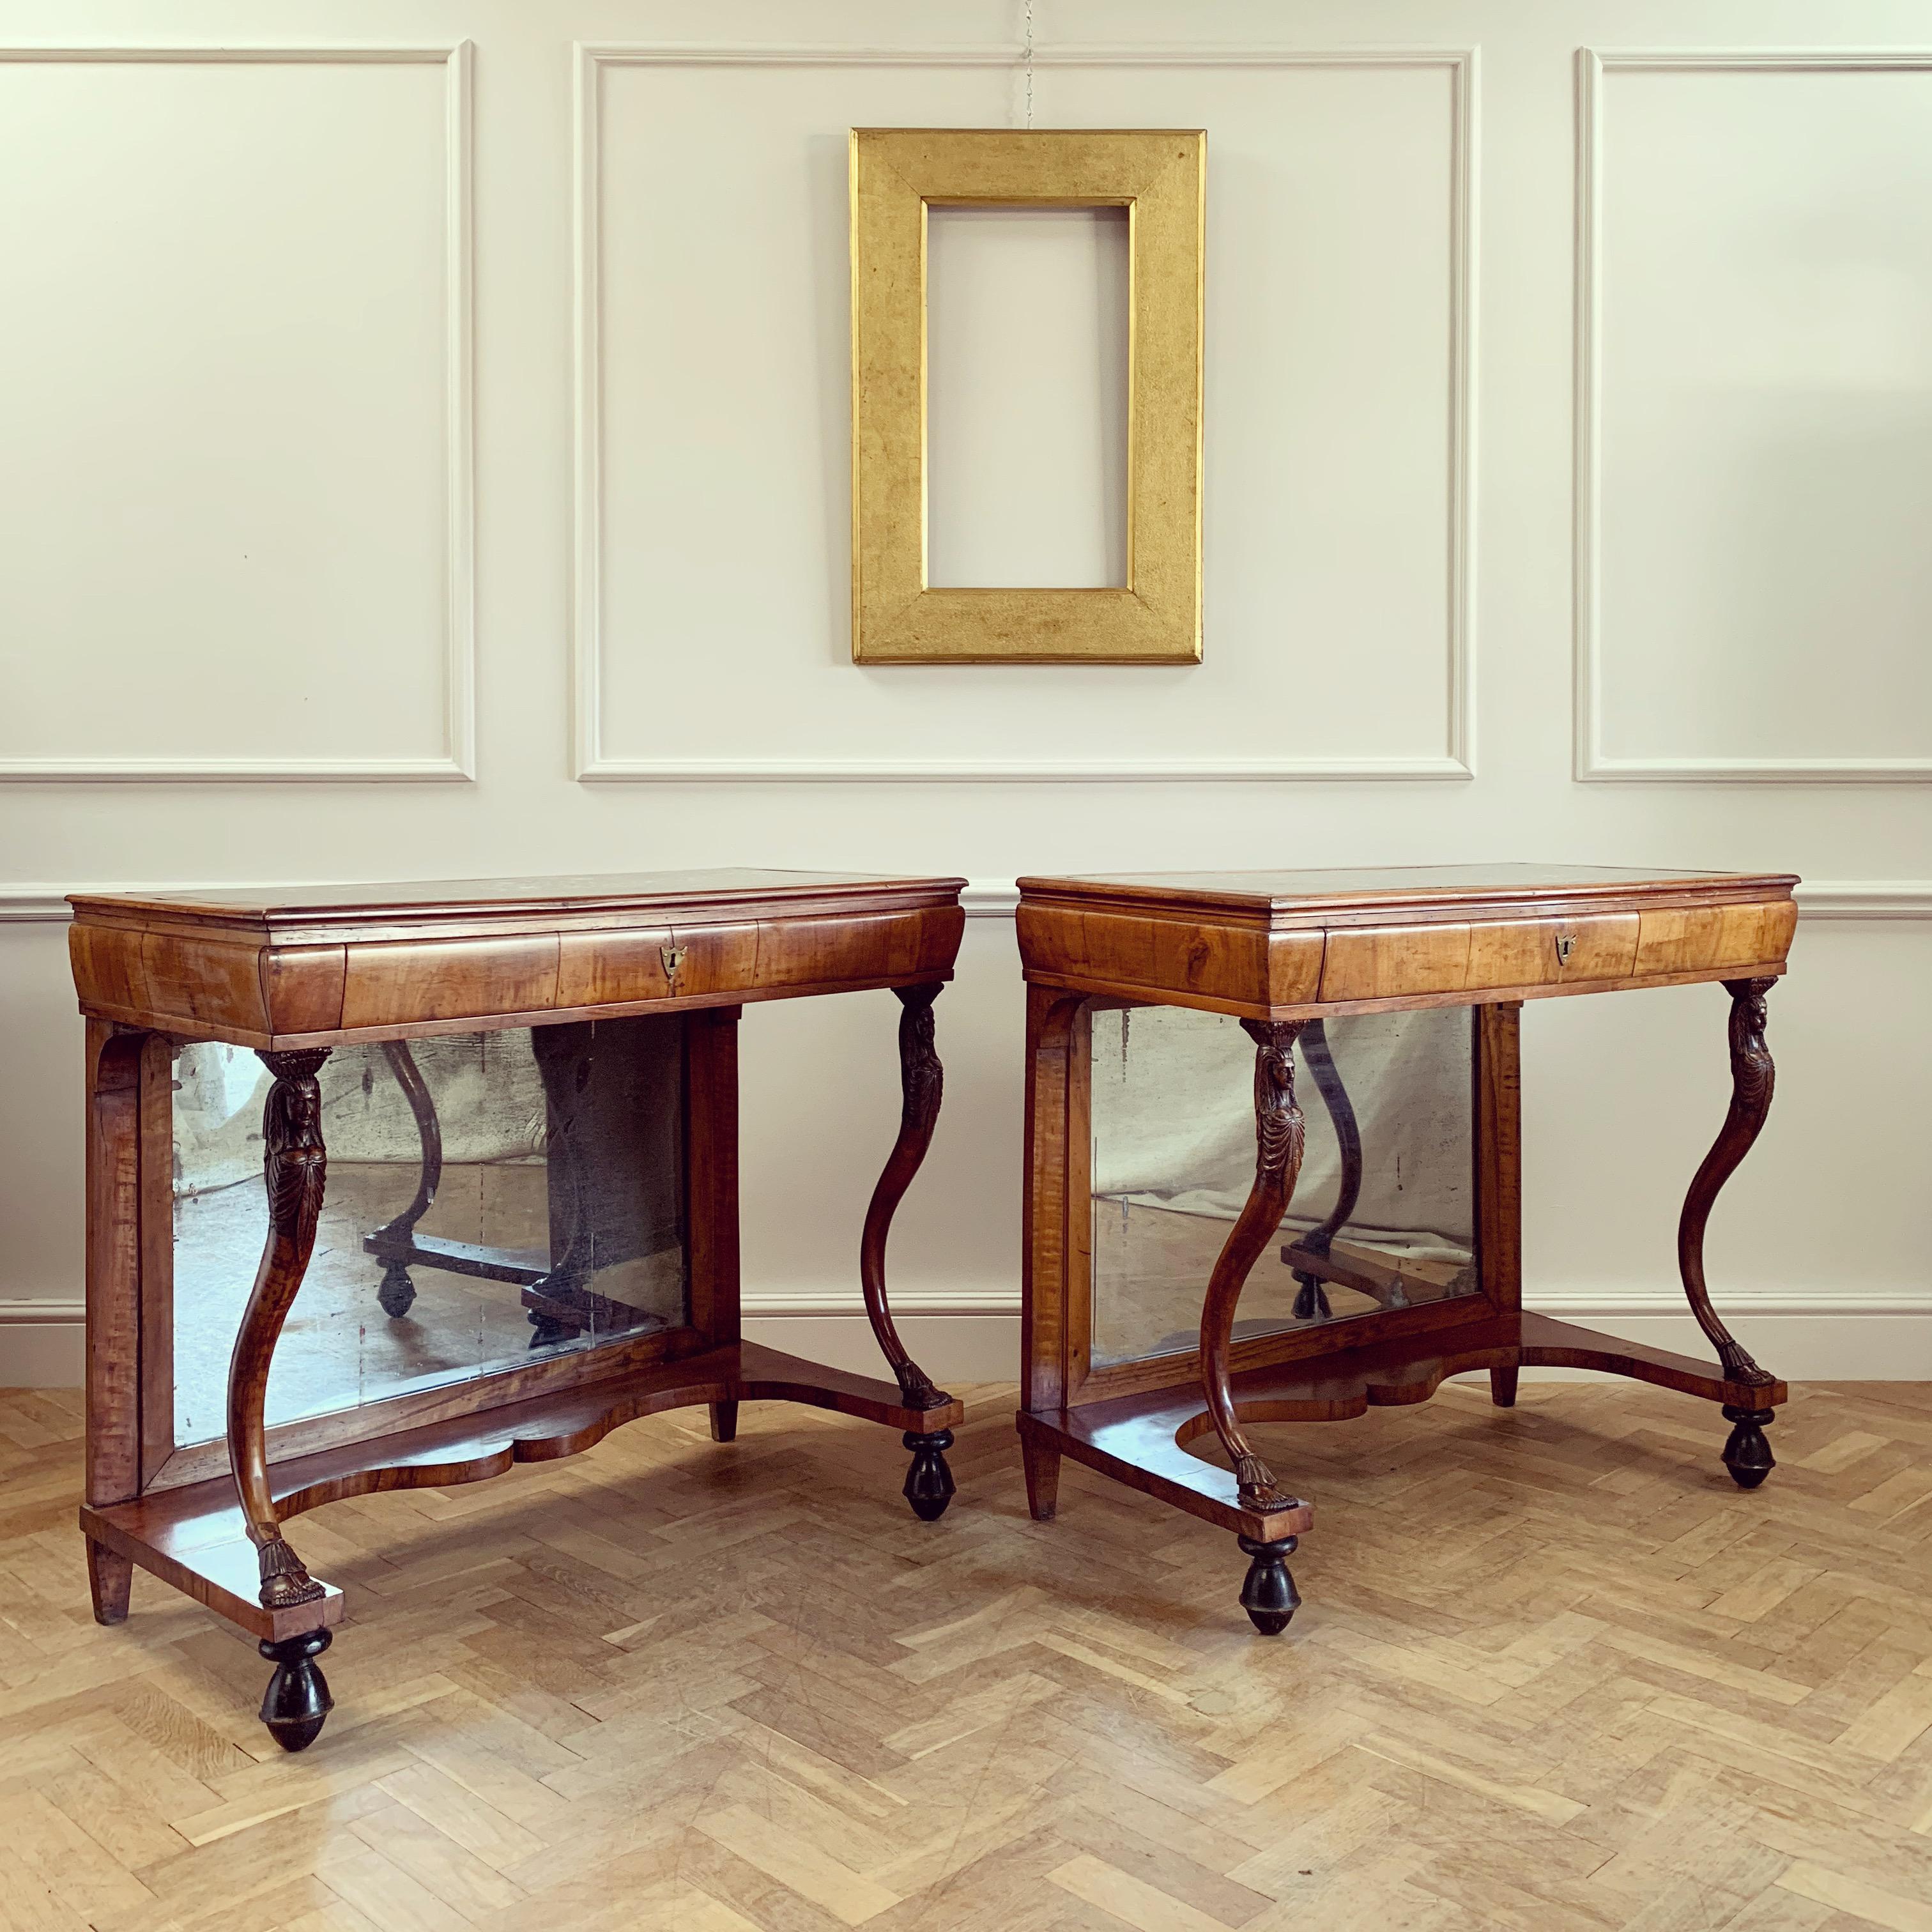 A fine pair of late eighteenth century Italian mahogany and walnut console tables with zoomorphic caryatid uprights, the back with original plate and occio de pavone marble inserts to top.